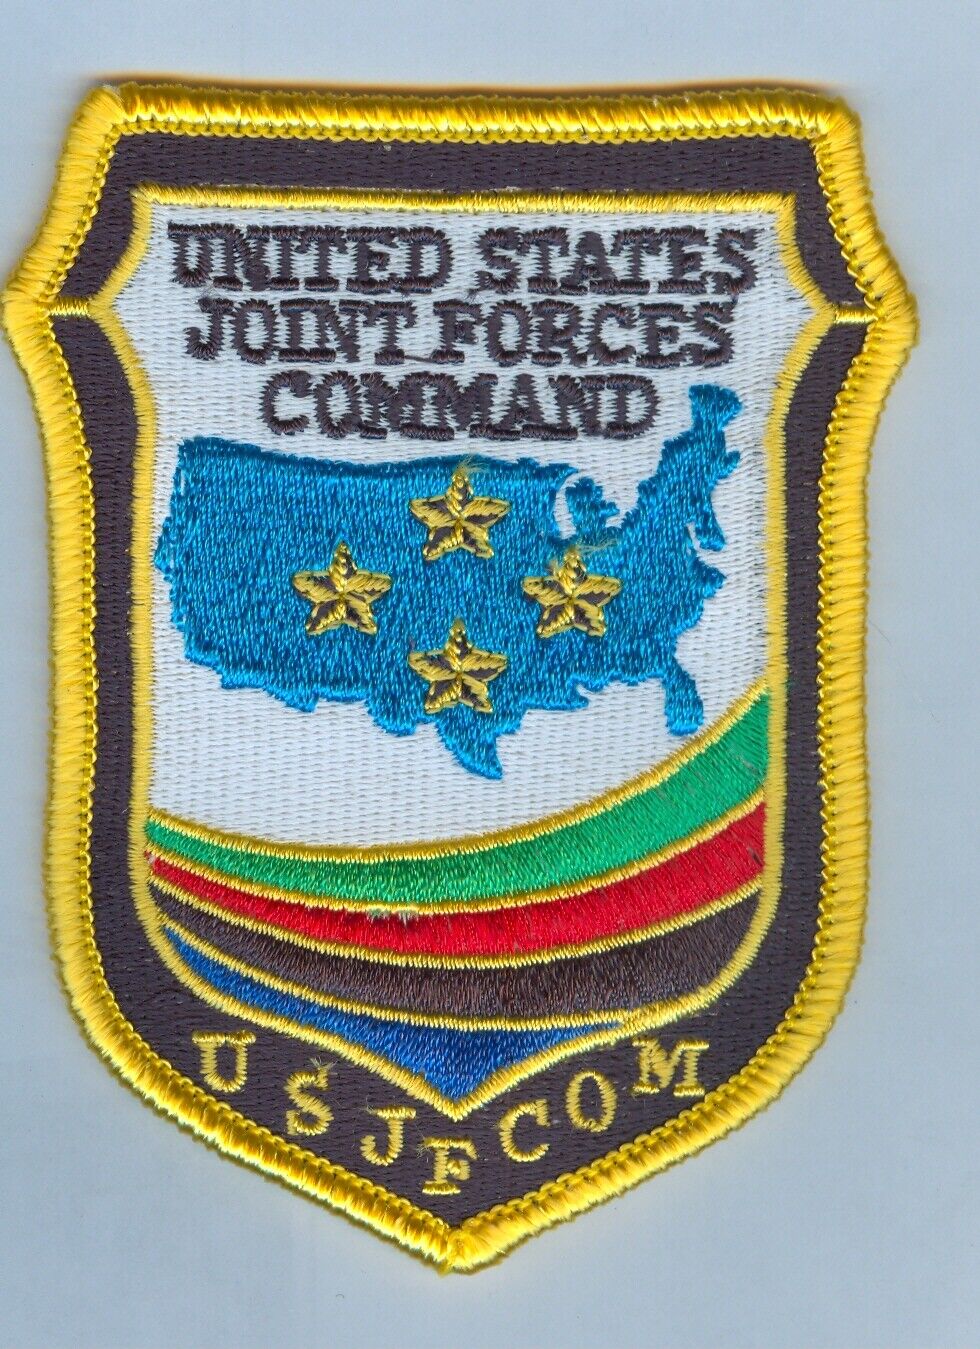 Joint Forces Command Pocket Patch - A SUPERB & BEAUTIFUL INSIGNIA